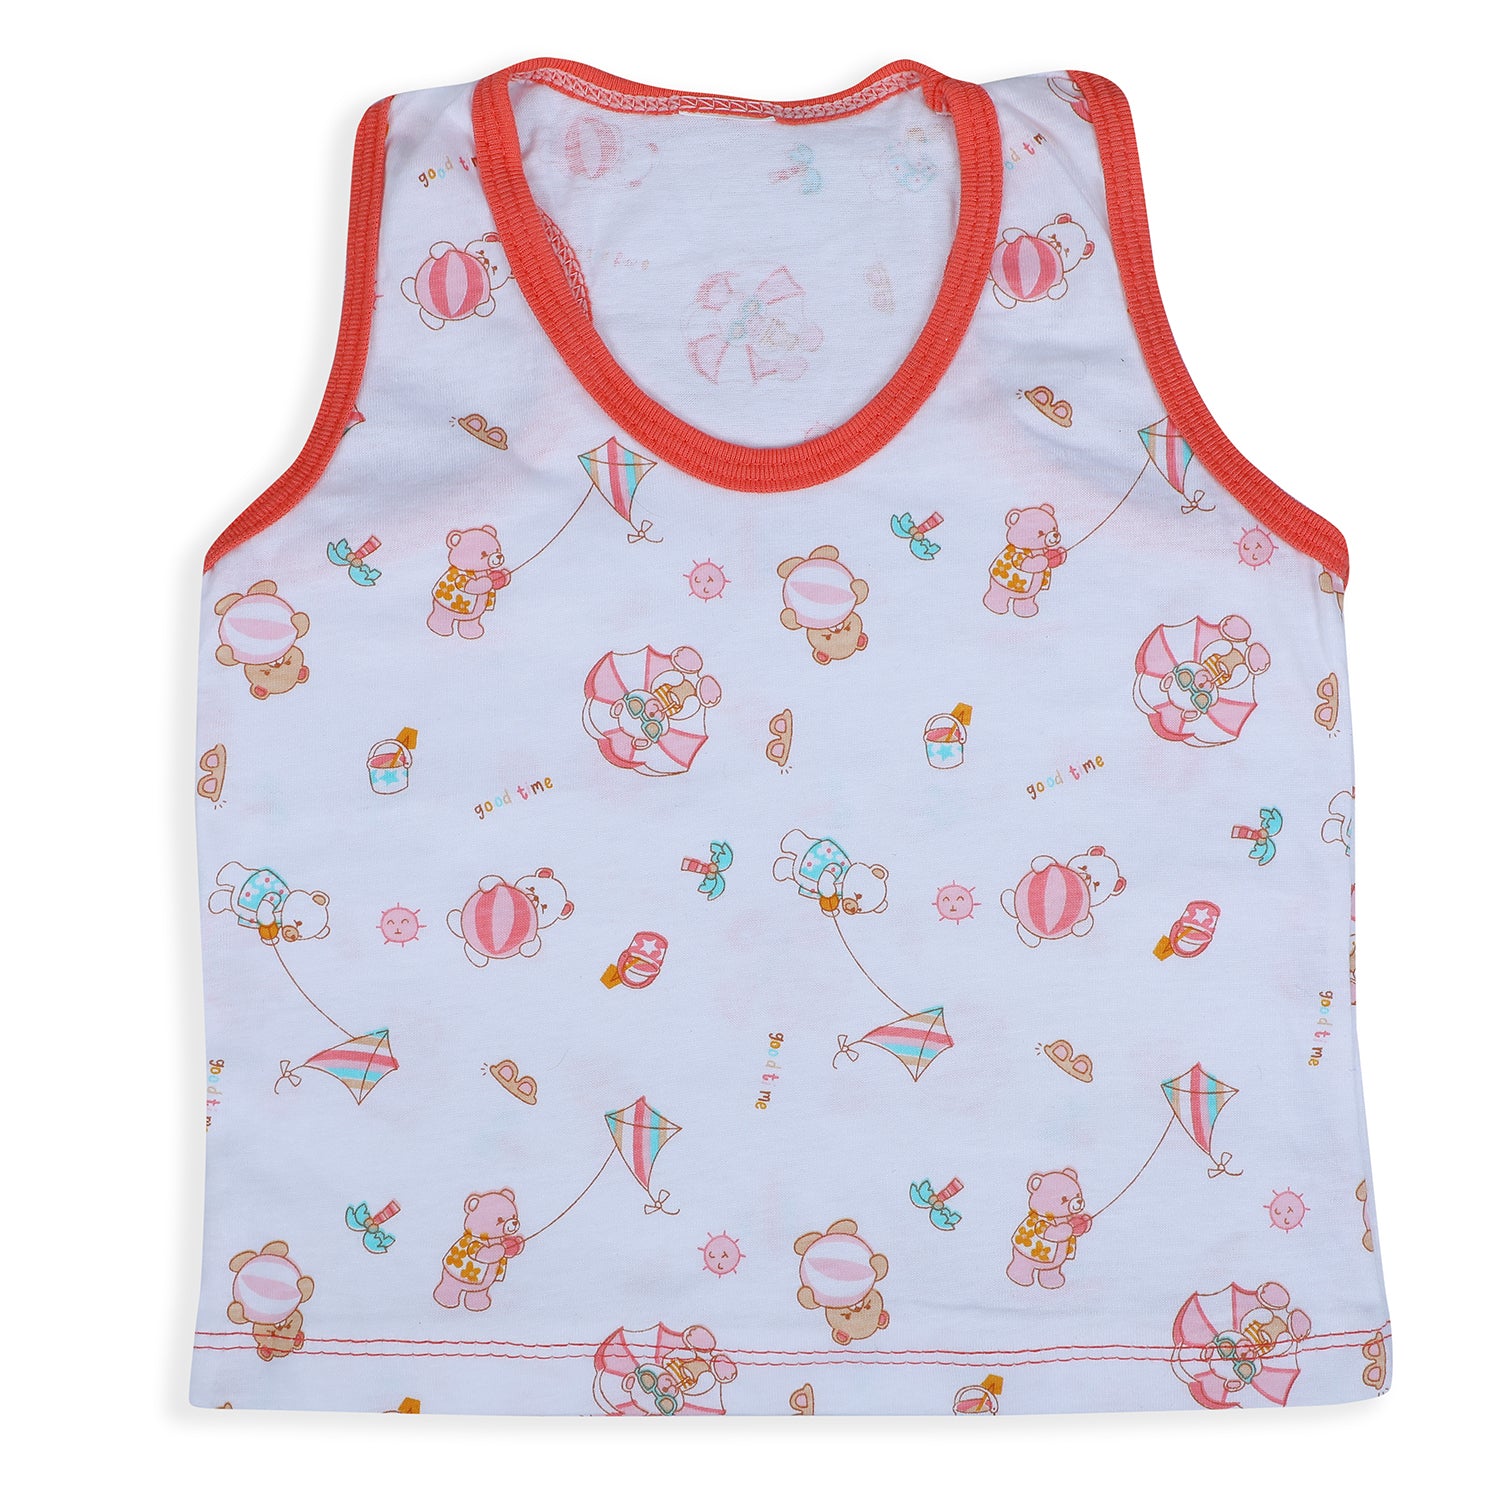 Baby Moo Kite Flying Bear Pure Cotton Sleeveless Vest With Matching Bottom 2pcs Set - Red